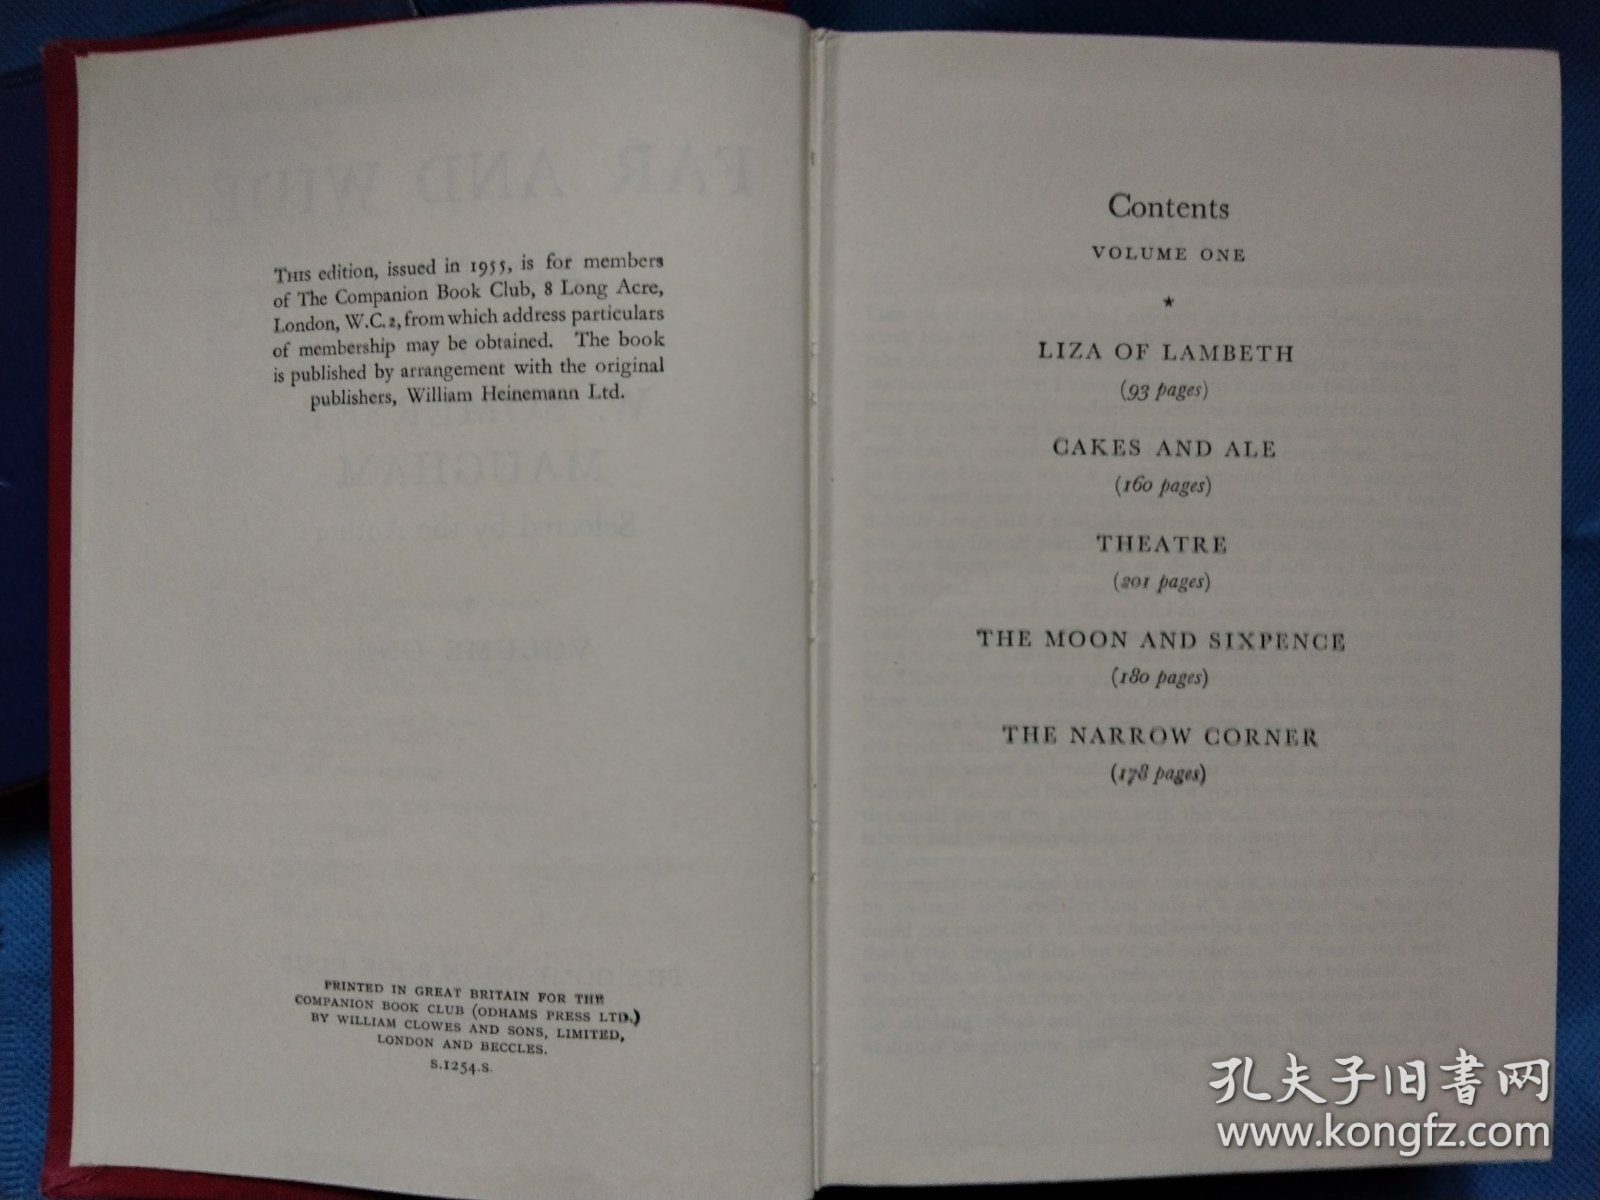 Far and Wide: Nine Novels by W. Somerset Maugham, Volume One: Liza of Lambeth / Cakes and Ale / Theatre / The Moon and Sixpence / The Narrow Corner 毛姆小说自选集， 卷一，共五部著名小说，布面精装本